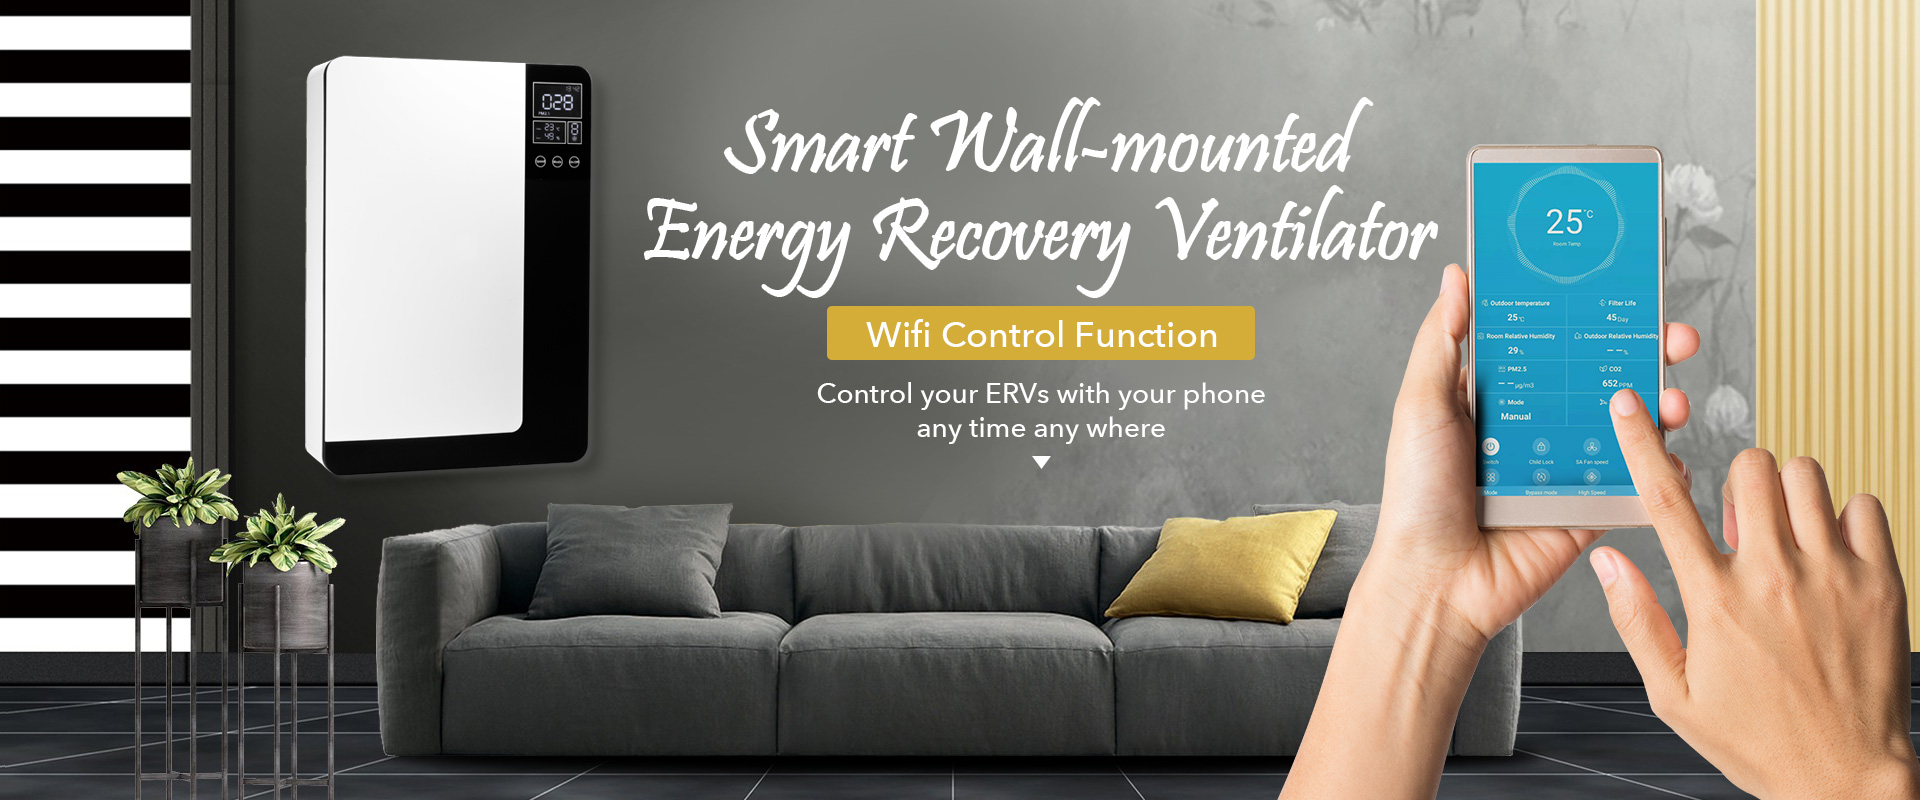 Holtop Smart wall mounted energy recovery ventilator